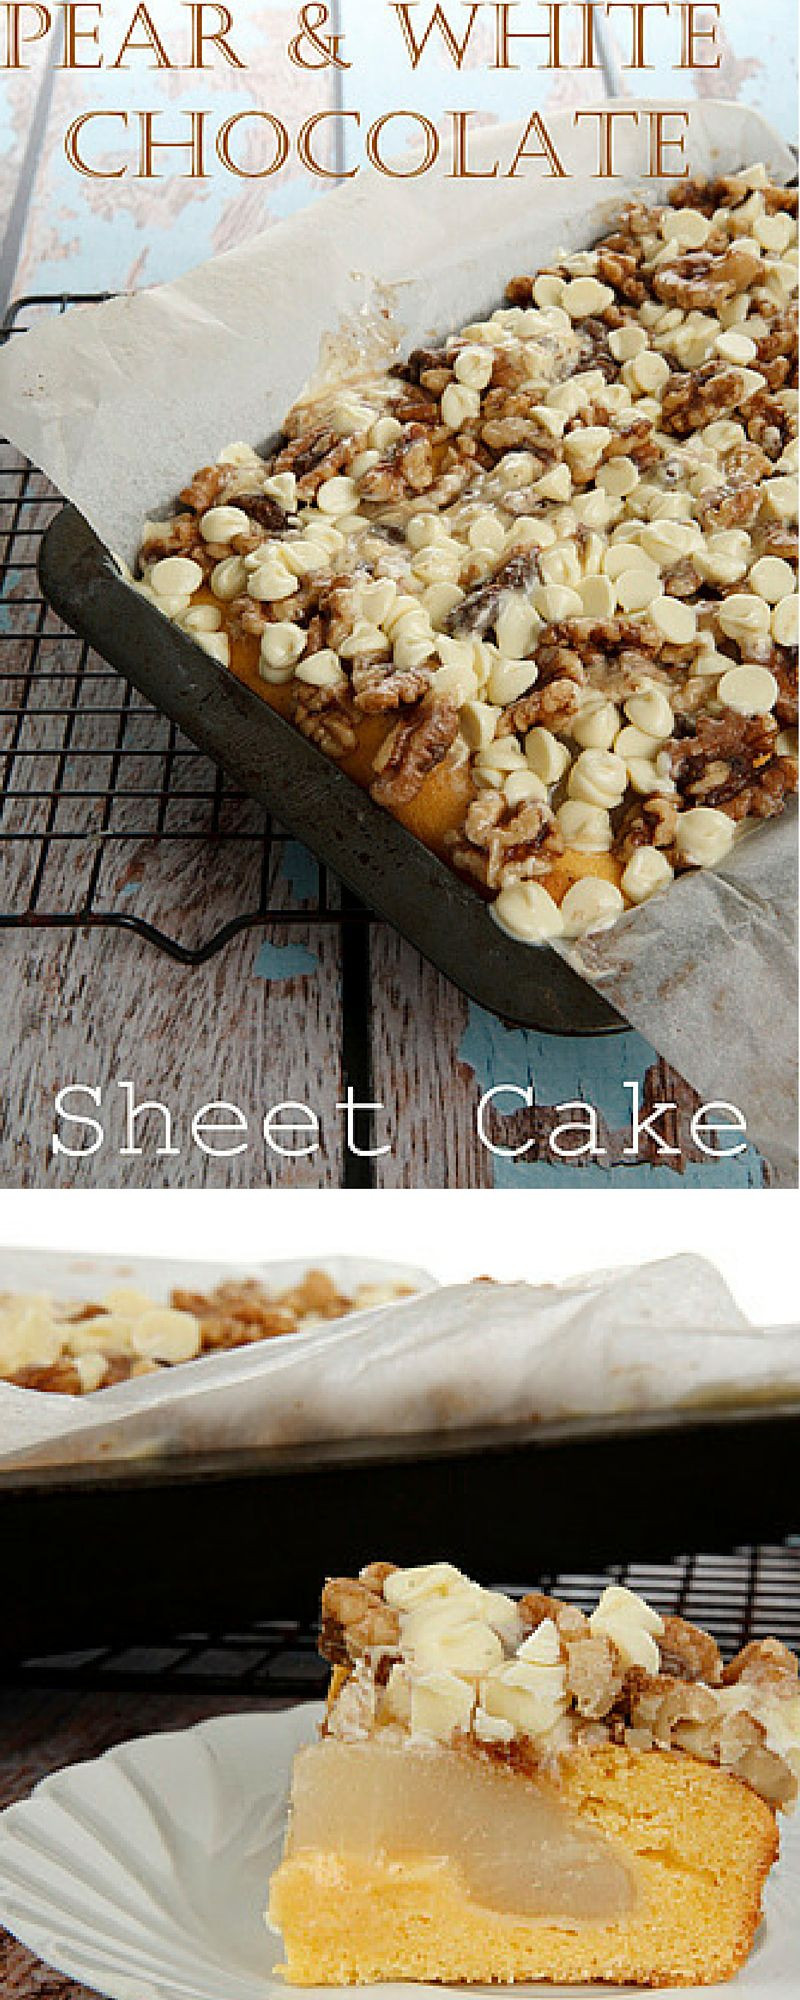 Baked Cakes &amp; Gourmet Desserts Llc
 Delicious Pear Crumble Sheet Cake